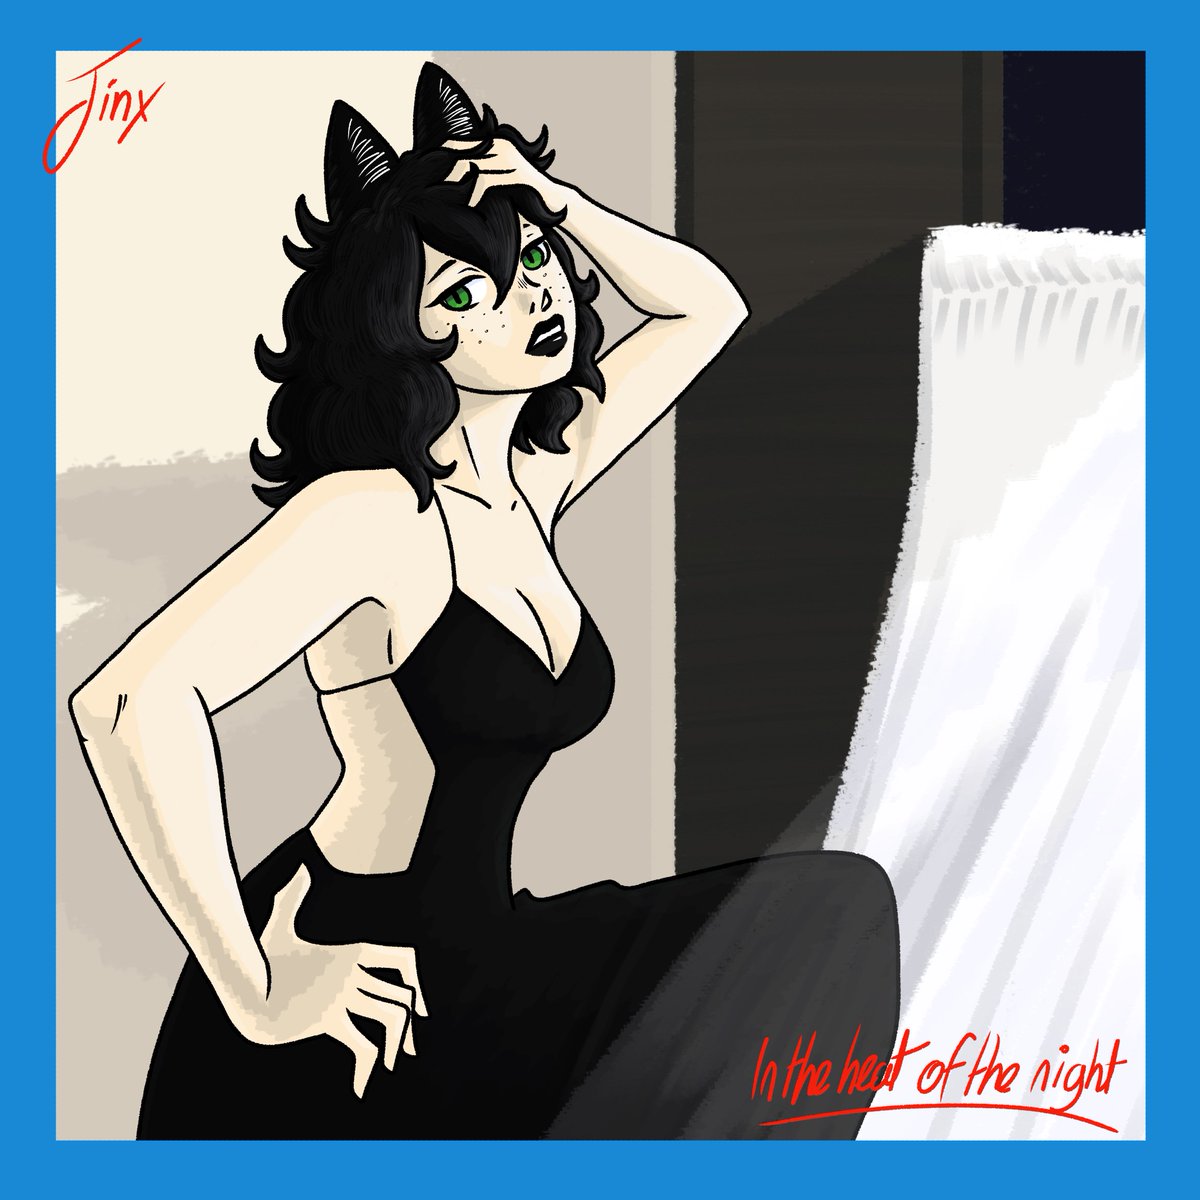 In The Heat Of The Night (Pat Benatar) album cover but redrawn with my oc Jinx